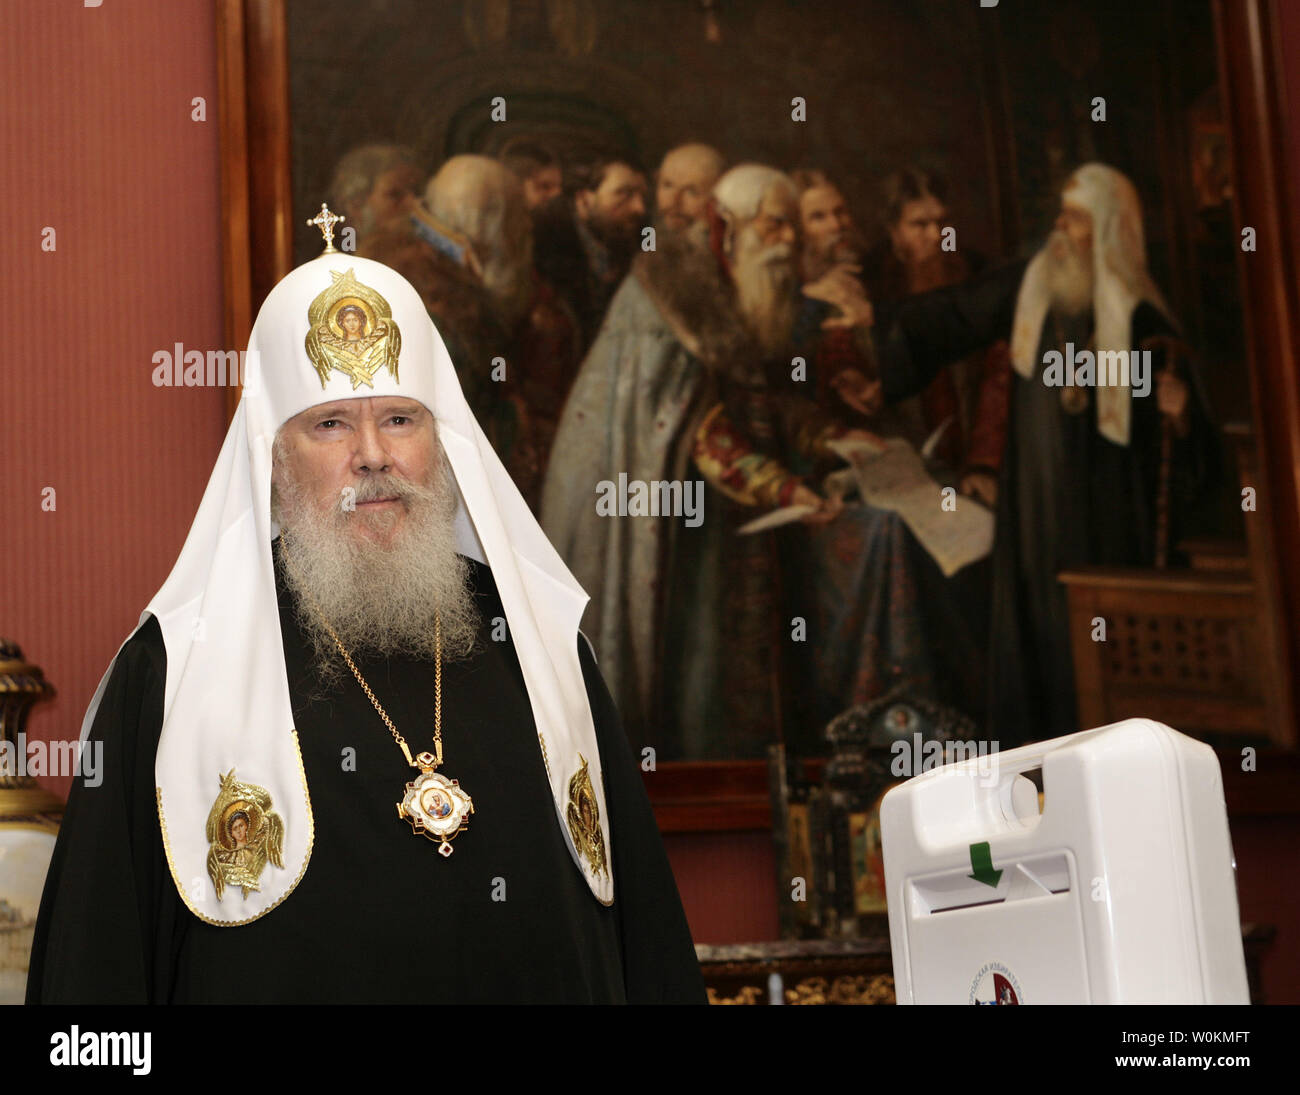 Russian Orthodox Patriarch Alexiy II, shown voting during the presidential election in Moscow on March 2, 2008 died at the age of 79 on December 5, 2008. Patriarch Alexy II led the Russian Orthodox church since 1990 during a post-Soviet revival of faith.   (UPI Photo/Yuri Gripas) Stock Photo